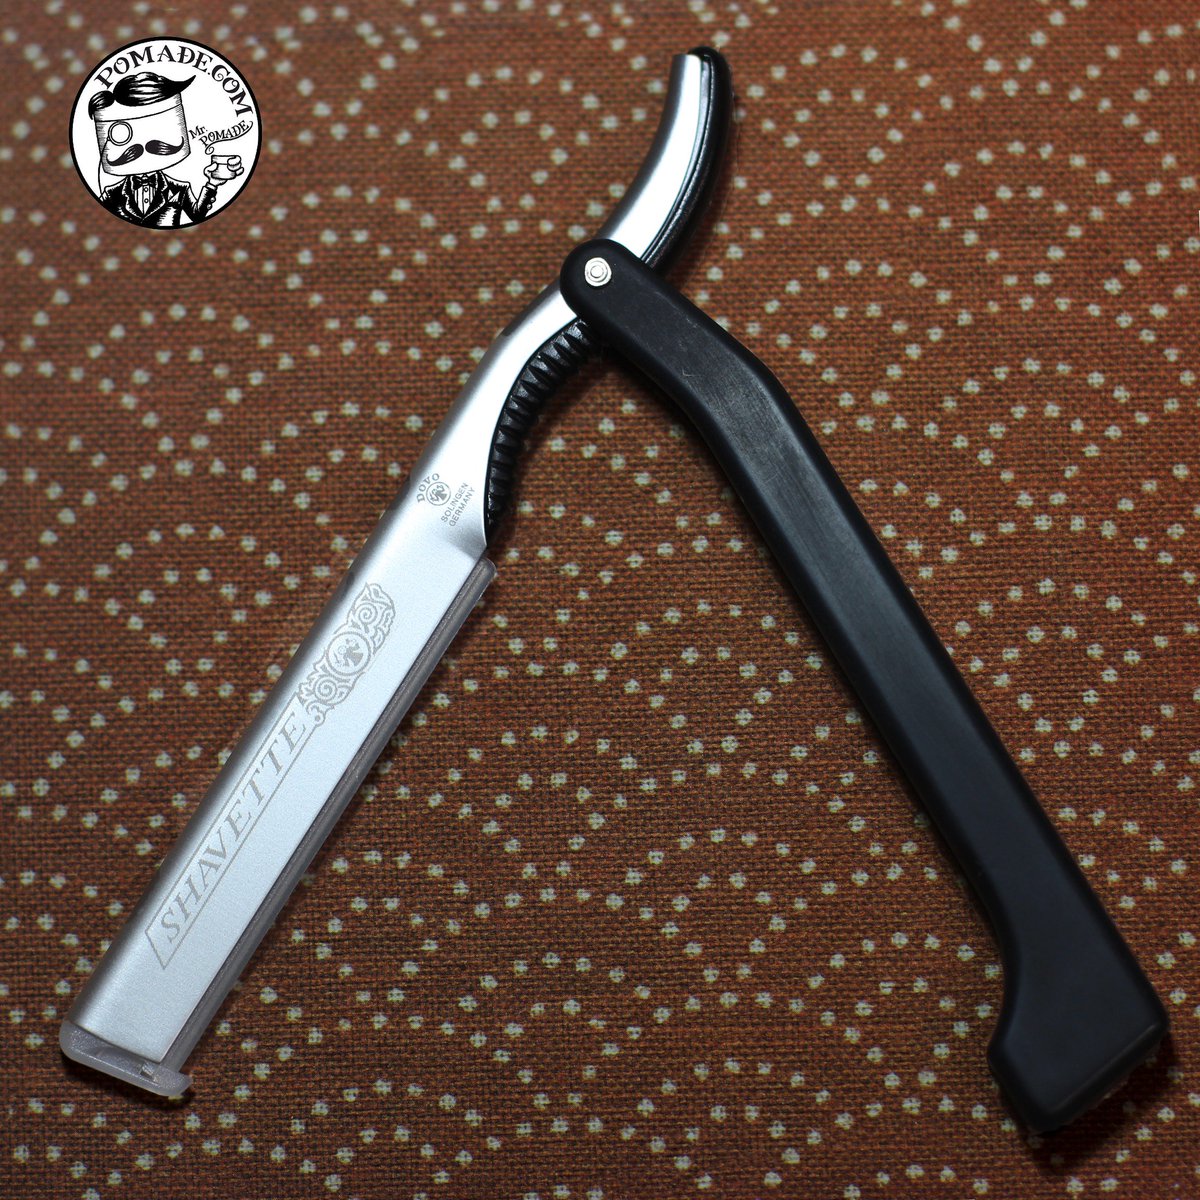 Start off with ease, comfortable to grip, light enough to maneuver and get your technique down. #dovosolingen #razor